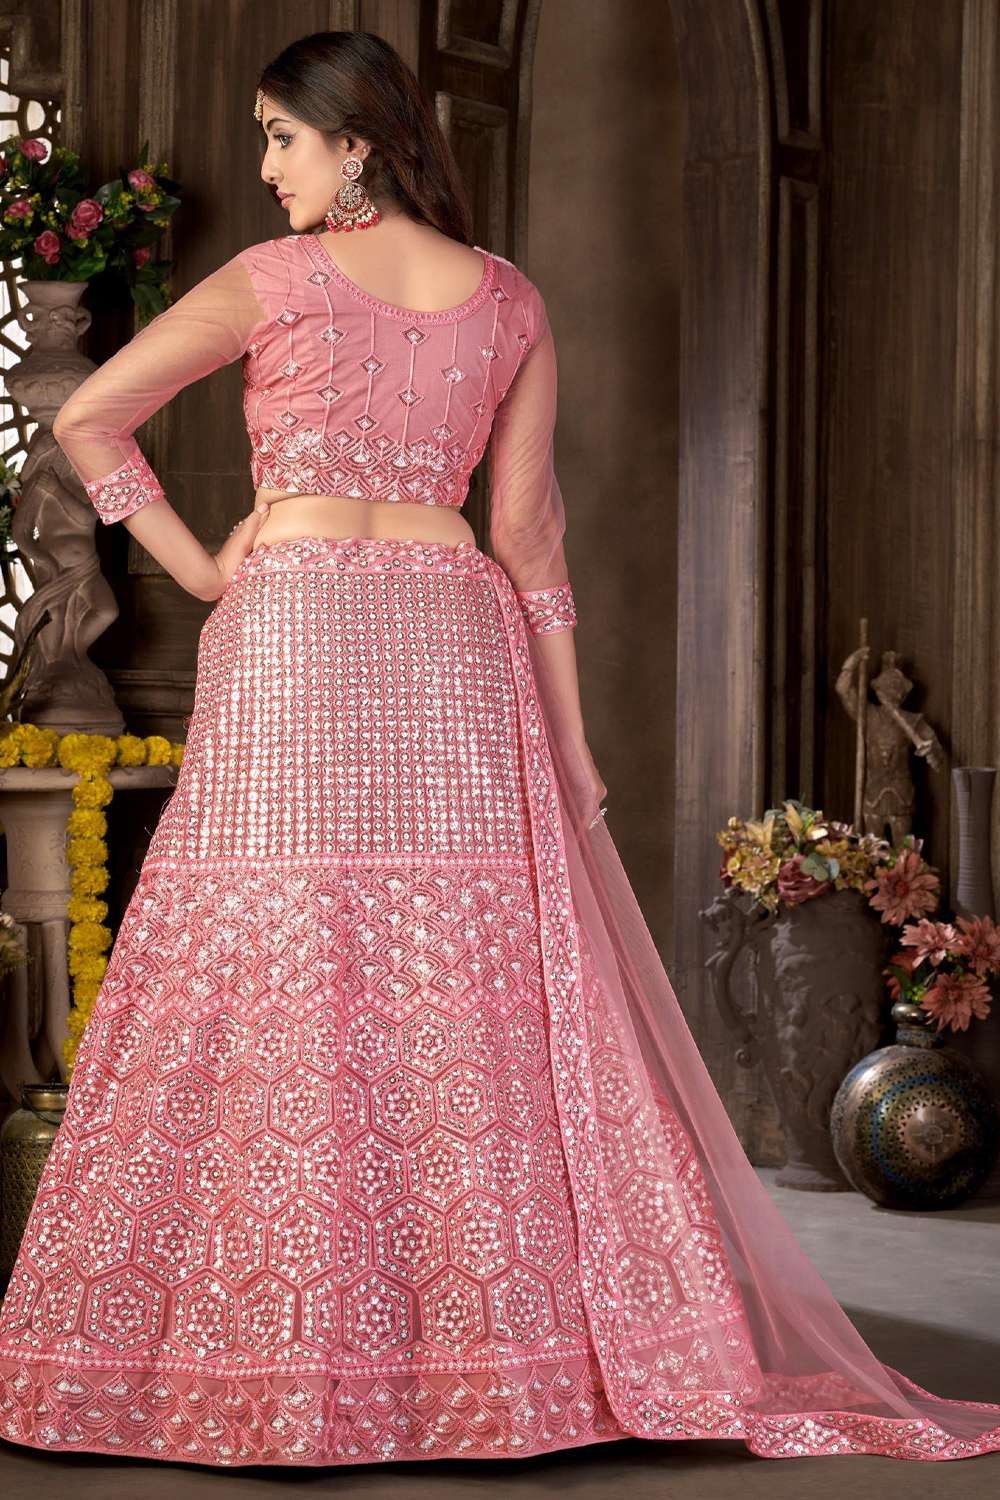 Mesmeric Party Wear Rose Pink Color Lehenga Choli - wefind